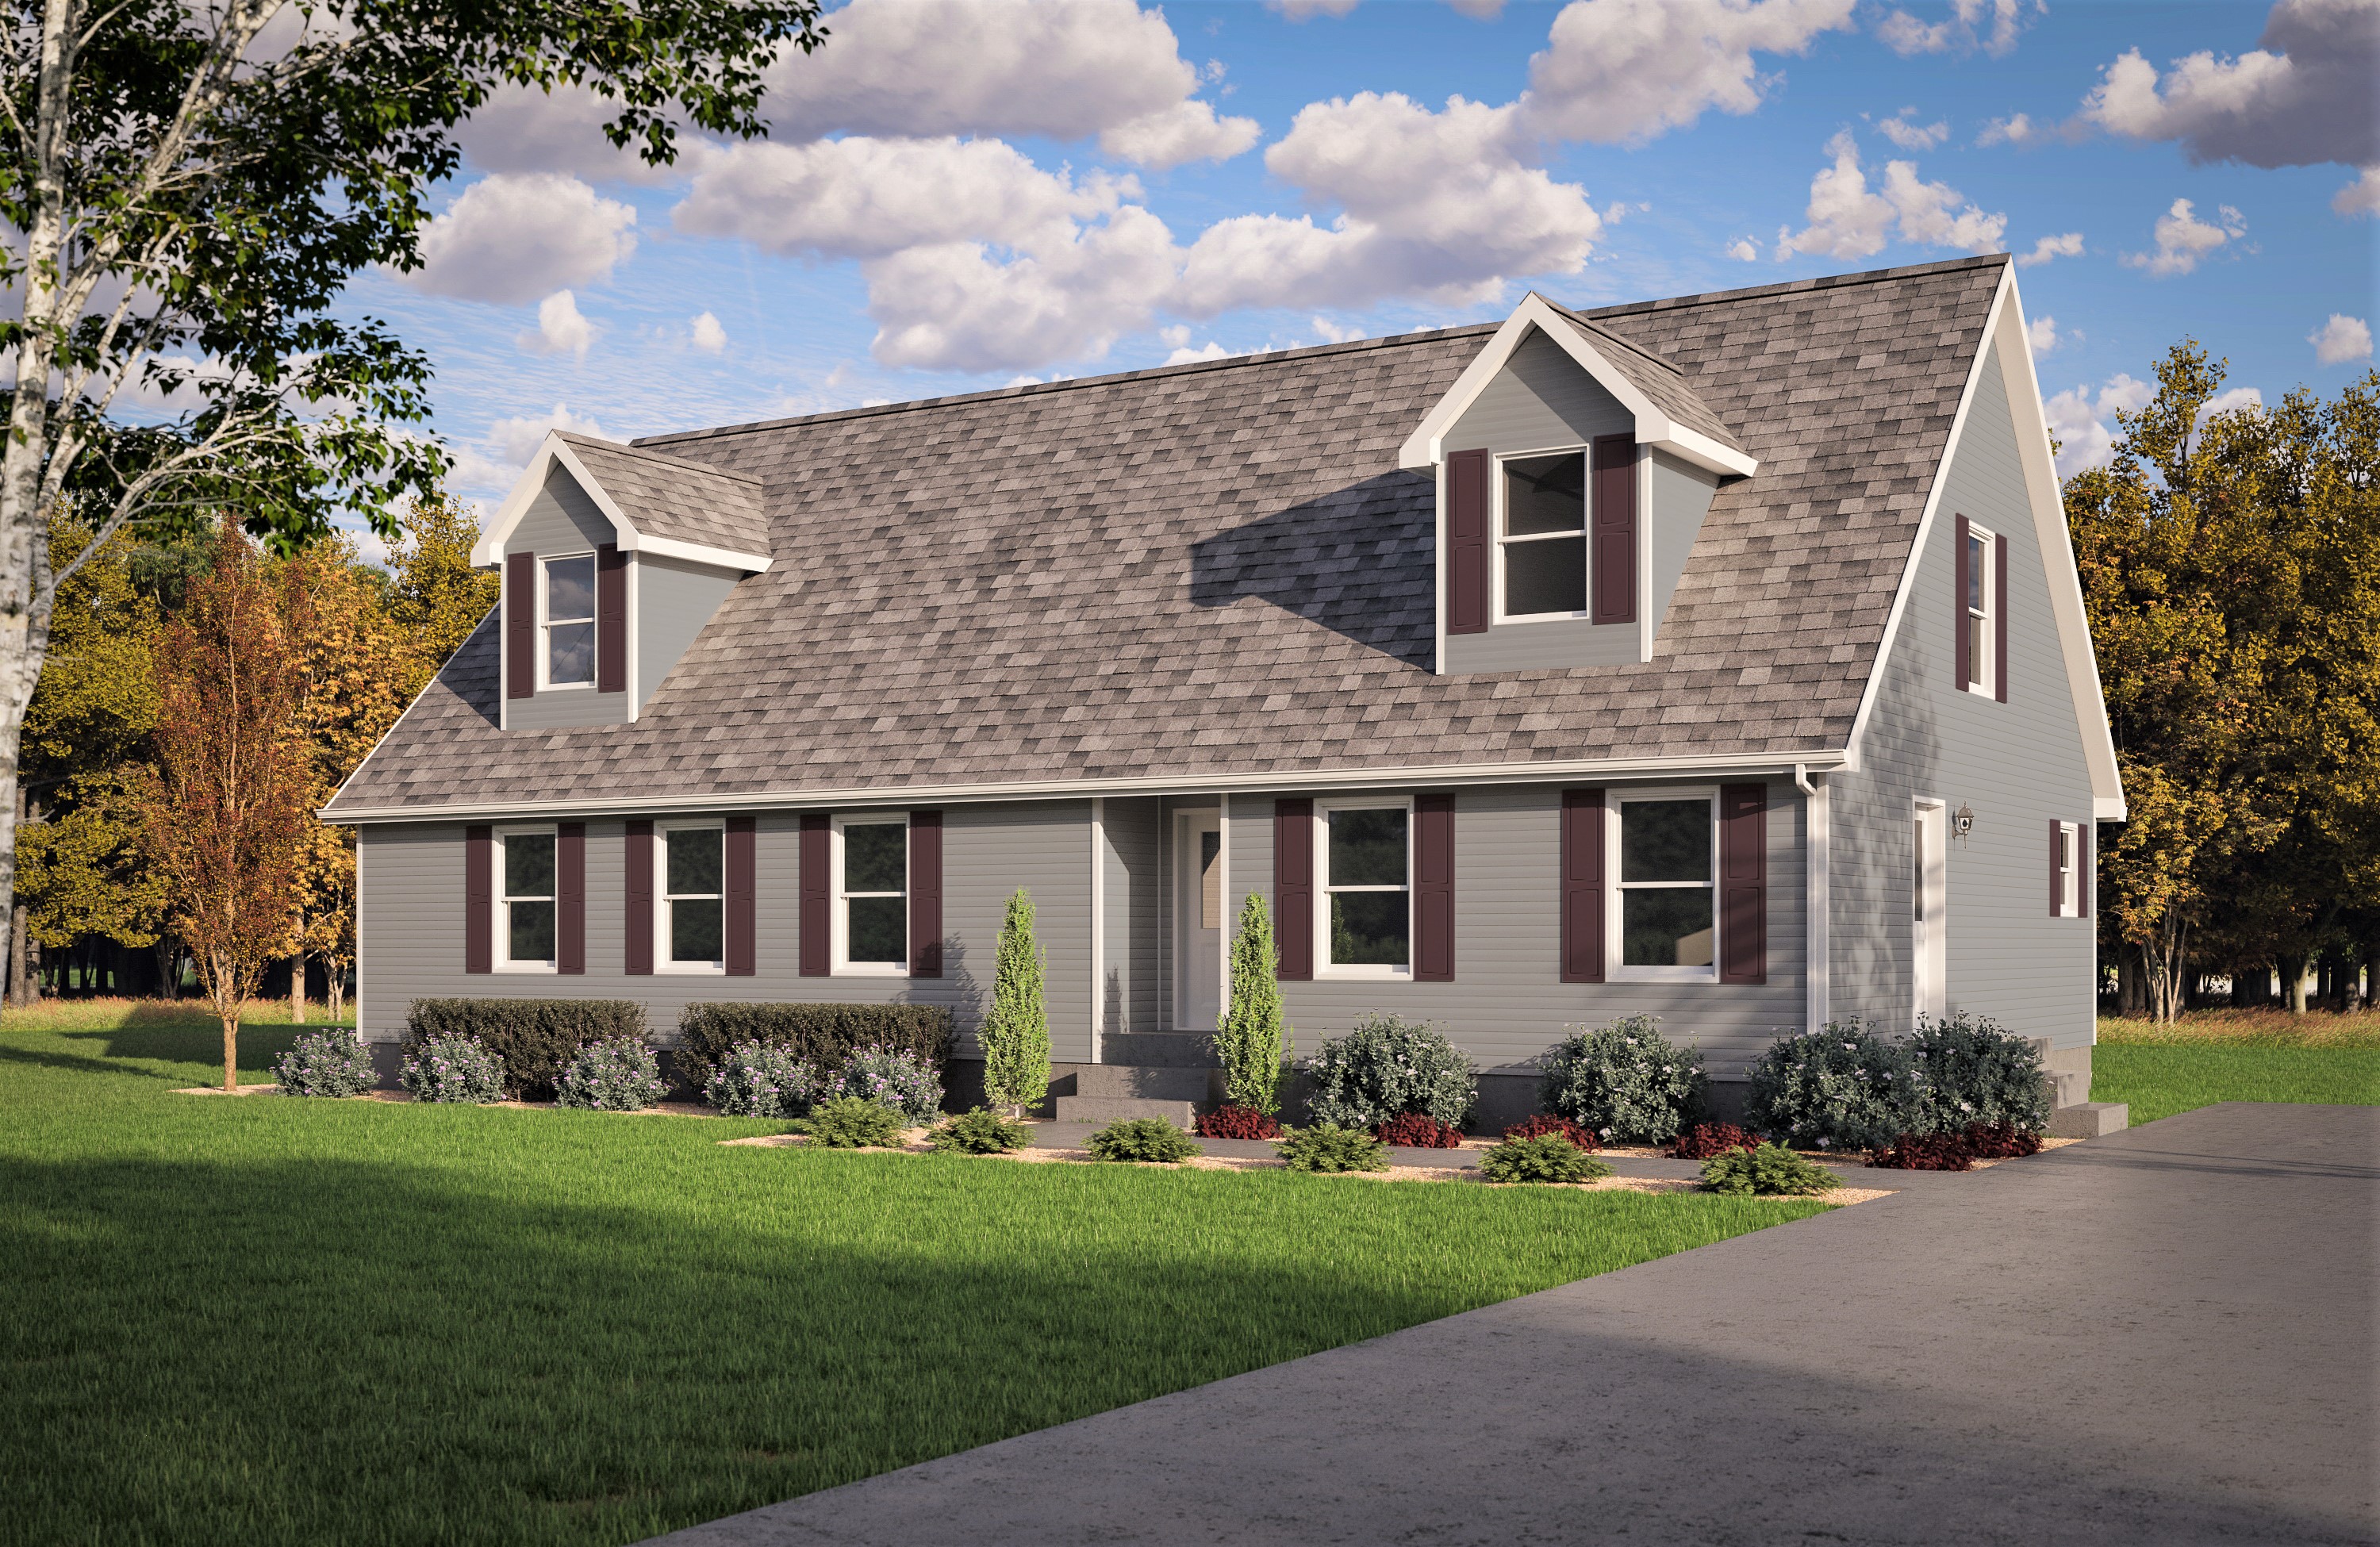 Optional 12/12 Roof Pitch  "Cape Cod" With Dog House Dormers